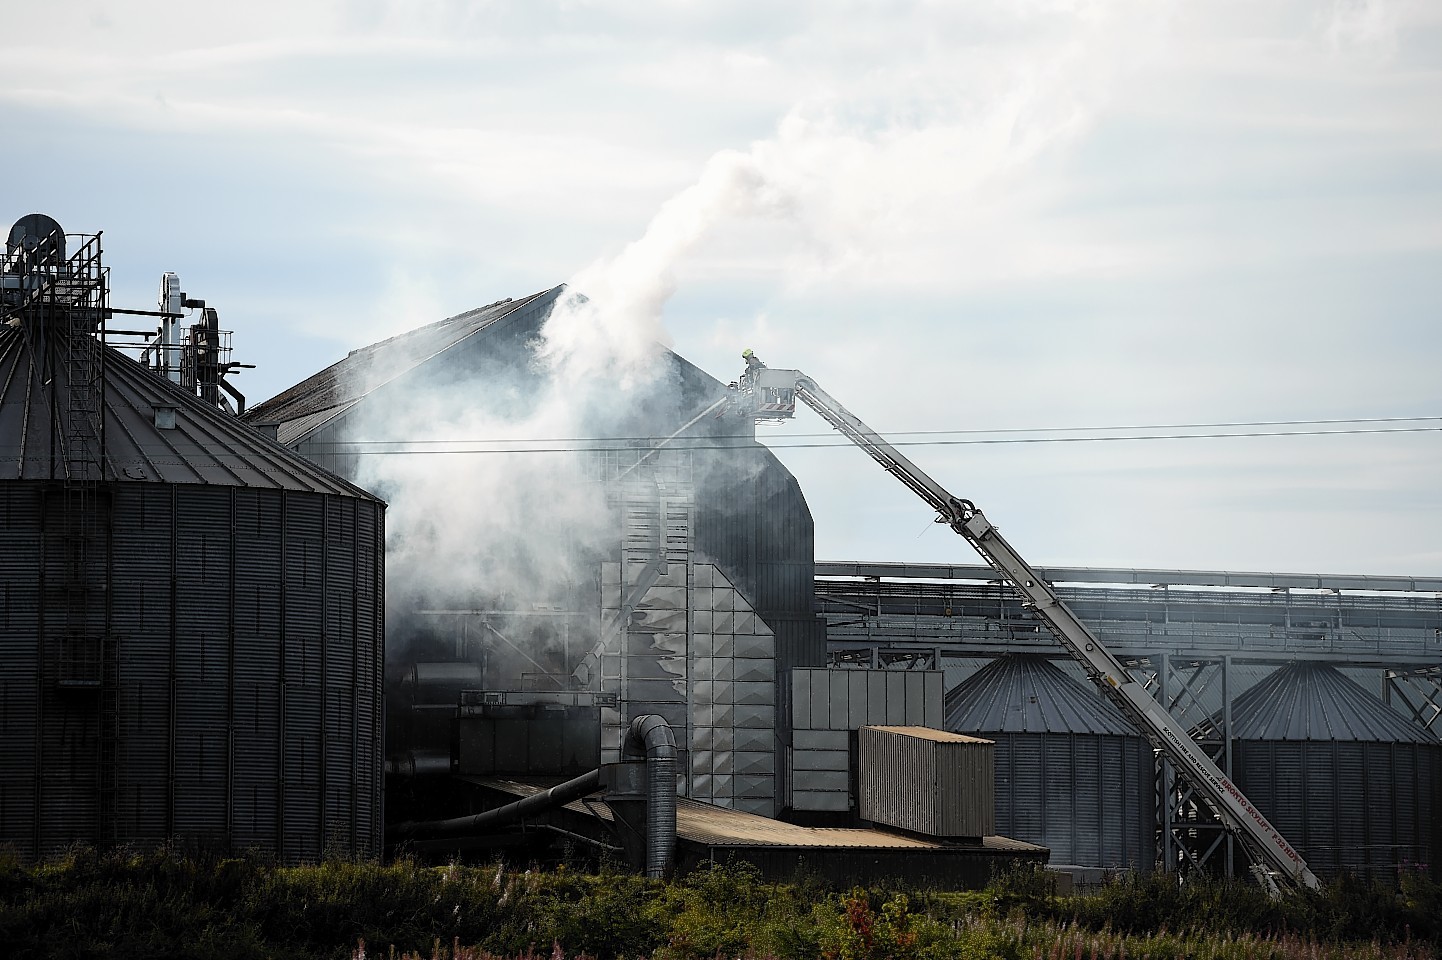 Firefighters hose down the fire in a grain drier at Tore, near Inverness. Picture by Gordon Lennox